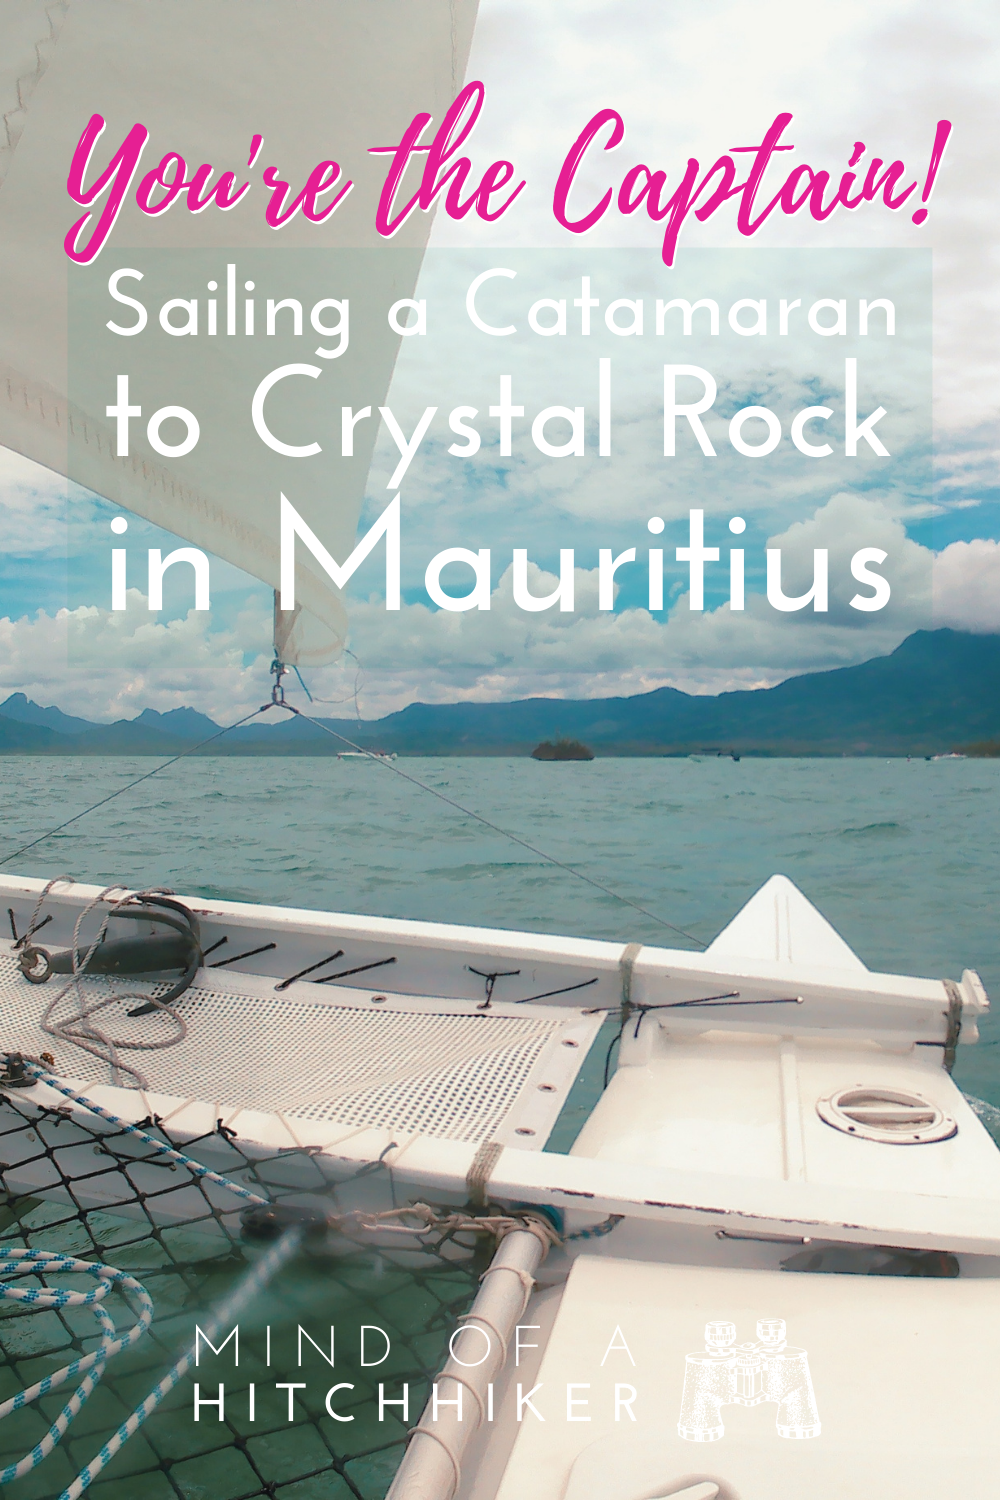 You're the captain no lazy sailing class in Mauritius steer it yourself